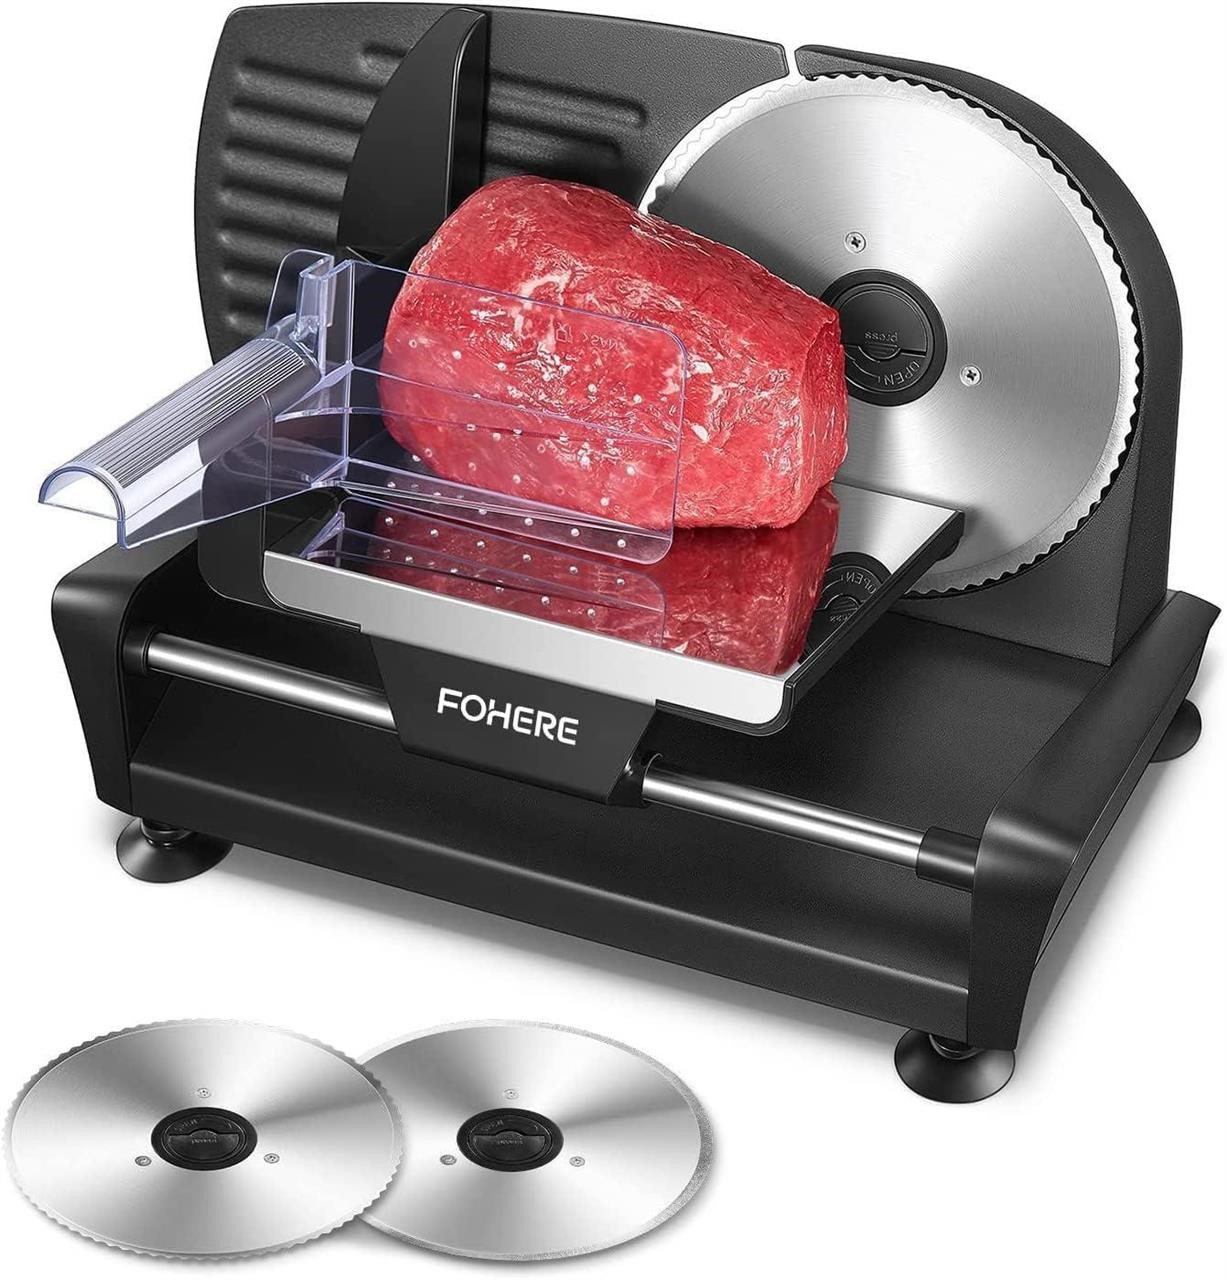 FOHERE 200W Electric Meat Slicer